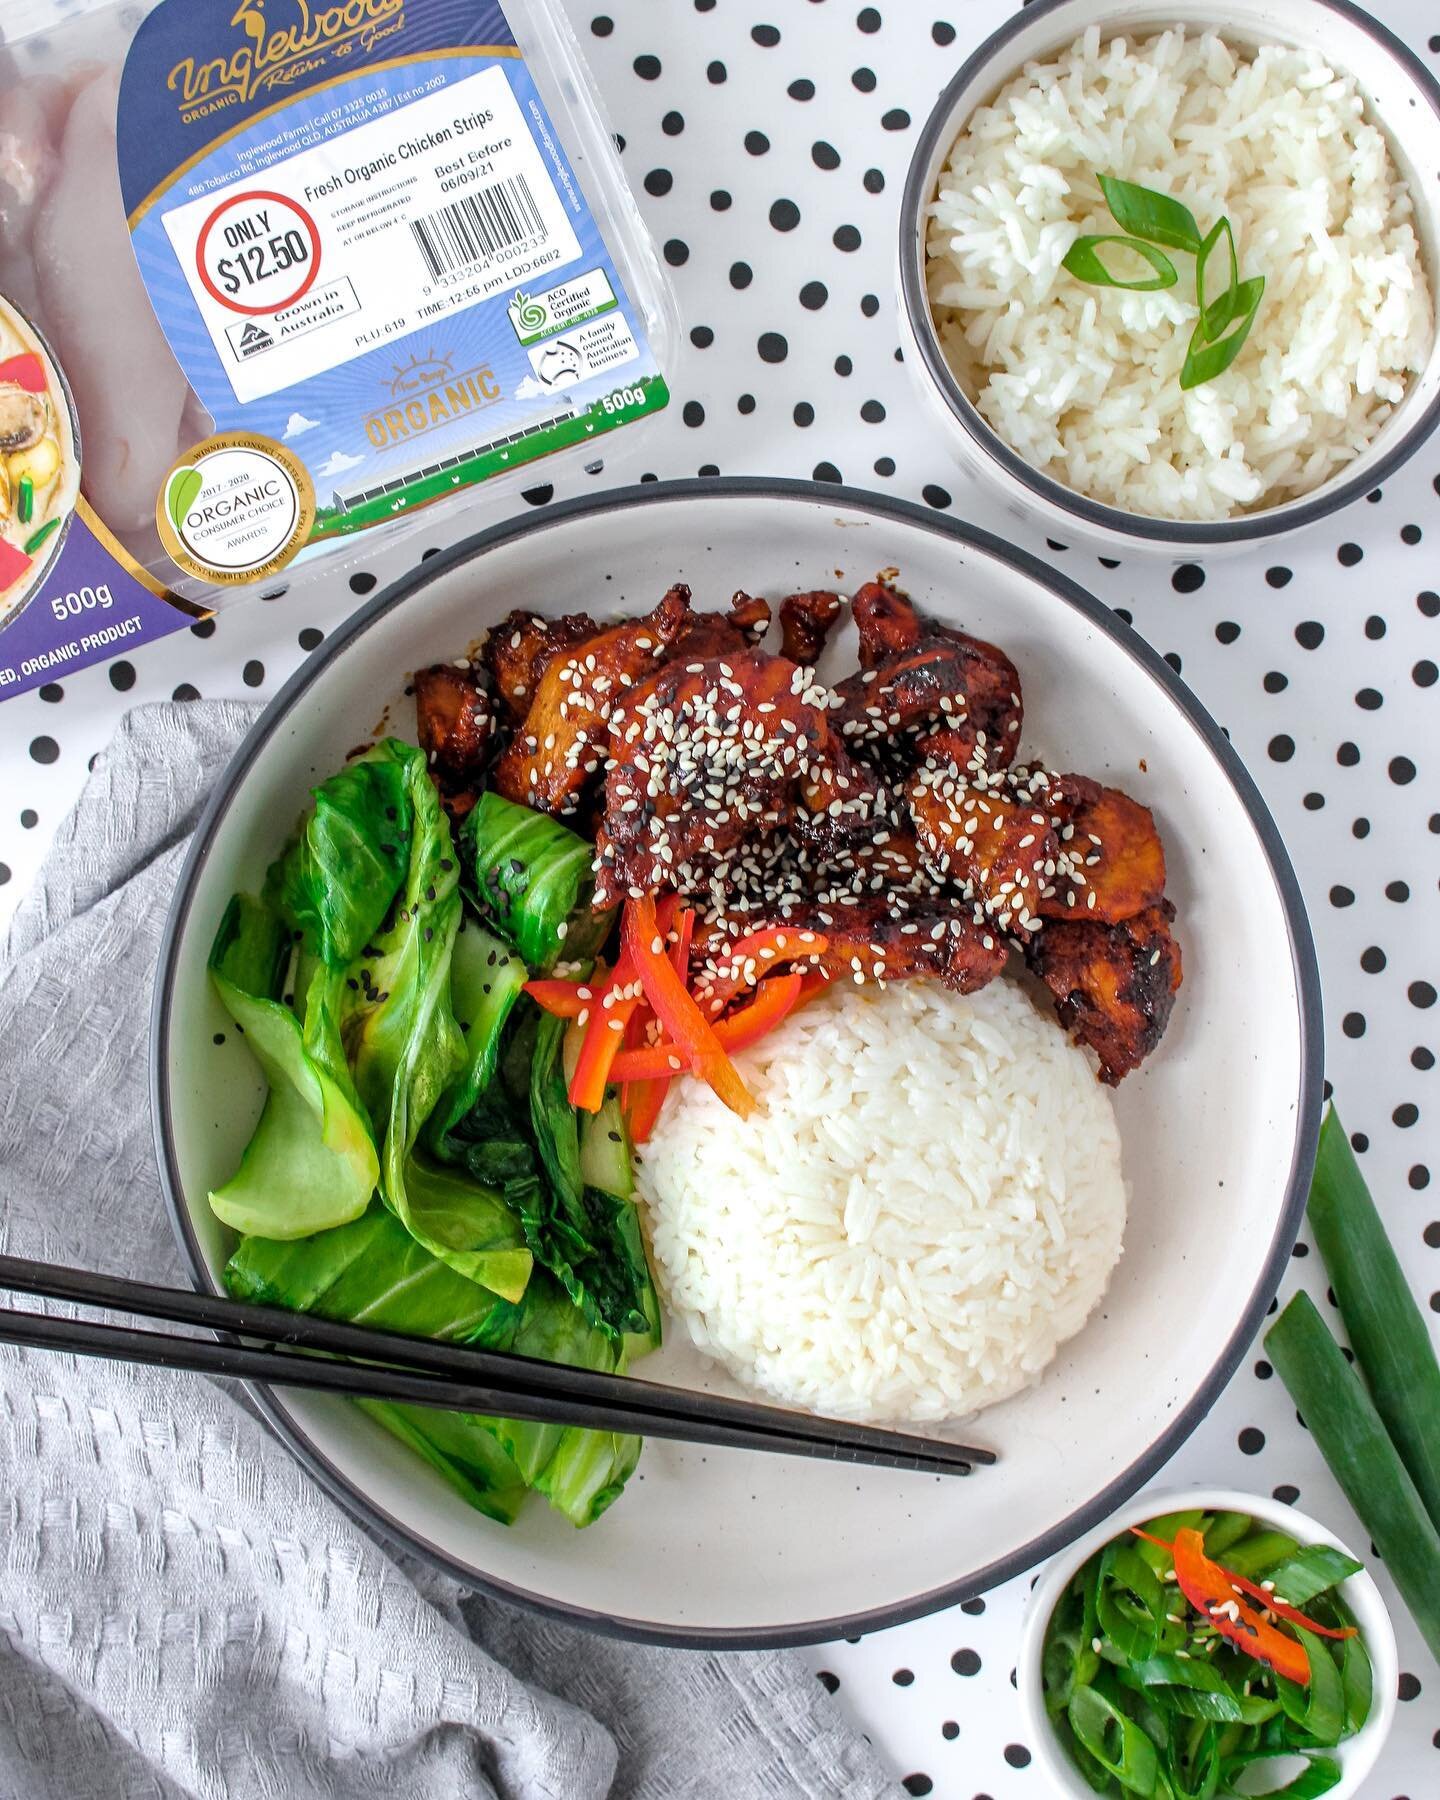 Celebrating the start of Australian Organic Awareness Month 🌱 with this delicious Organic Honey Chicken &amp; Asian Greens (recipe below)! 🍴
&nbsp;
I'm not perfect, but I do always try &amp; choose Organic products whenever possible. A lot of produ